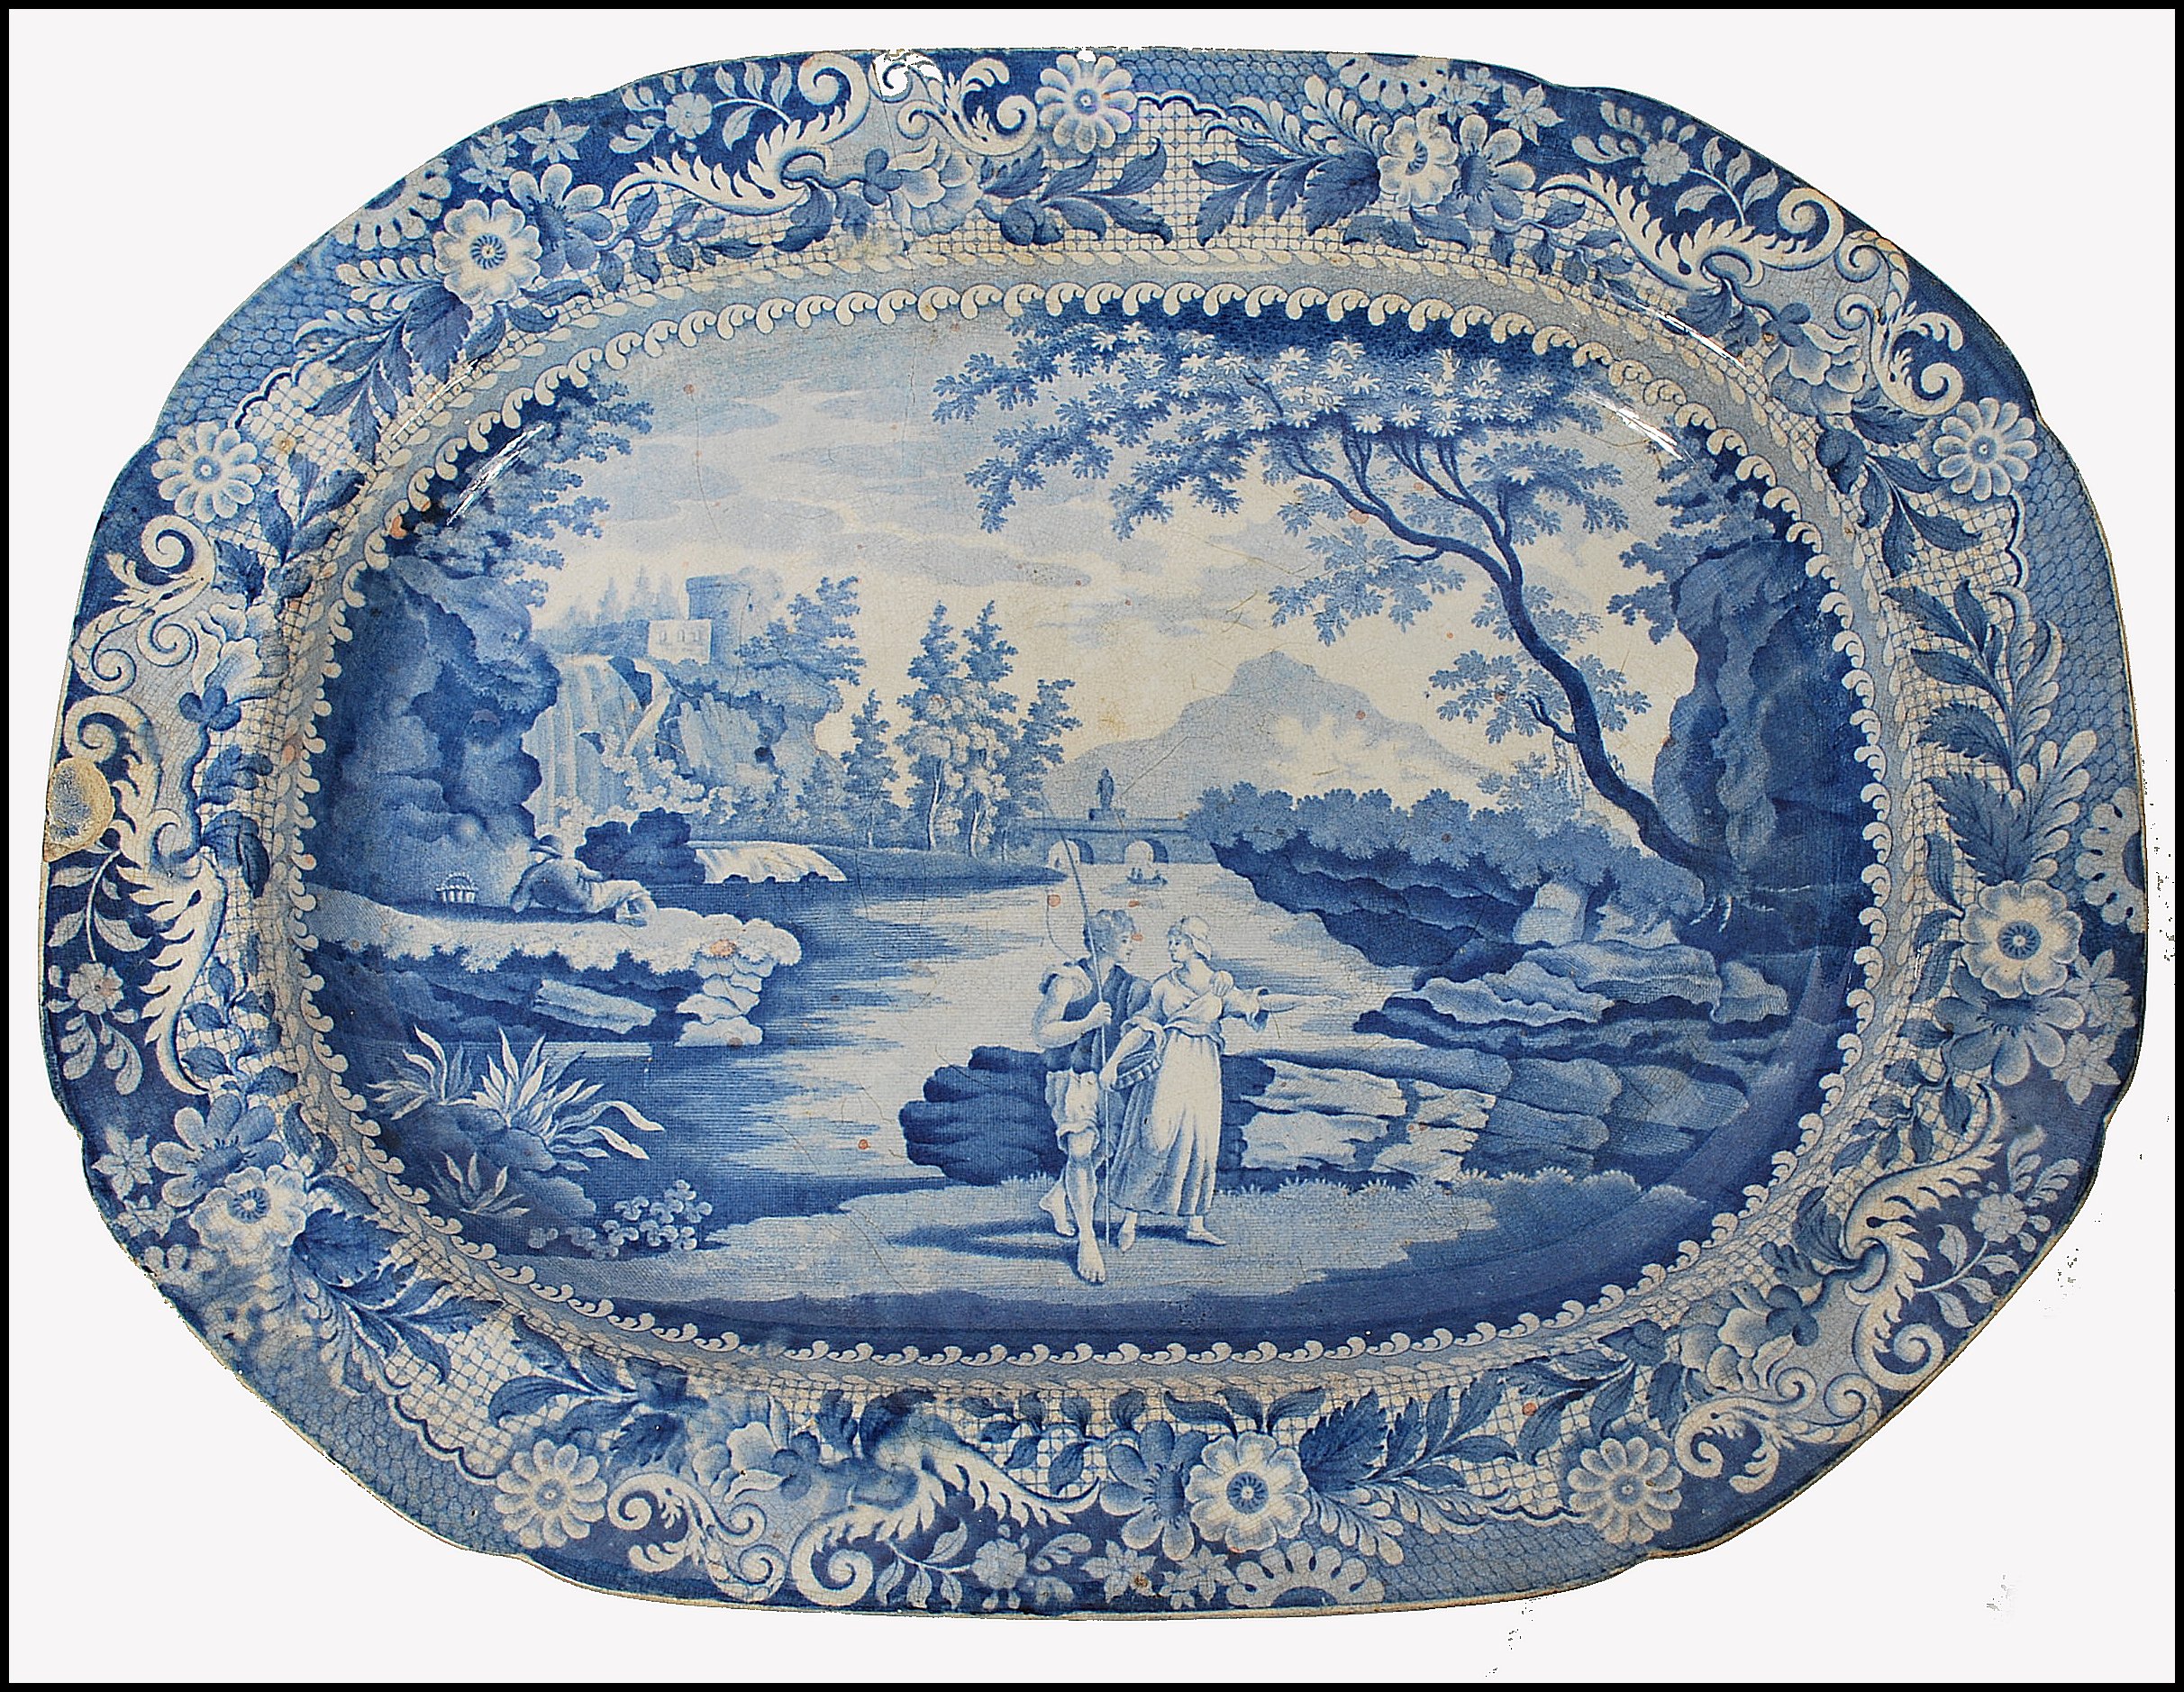 GEORGE III BRAMELD PEARLWARE BLUE AND WHITE MEAT PLATTER - 1810